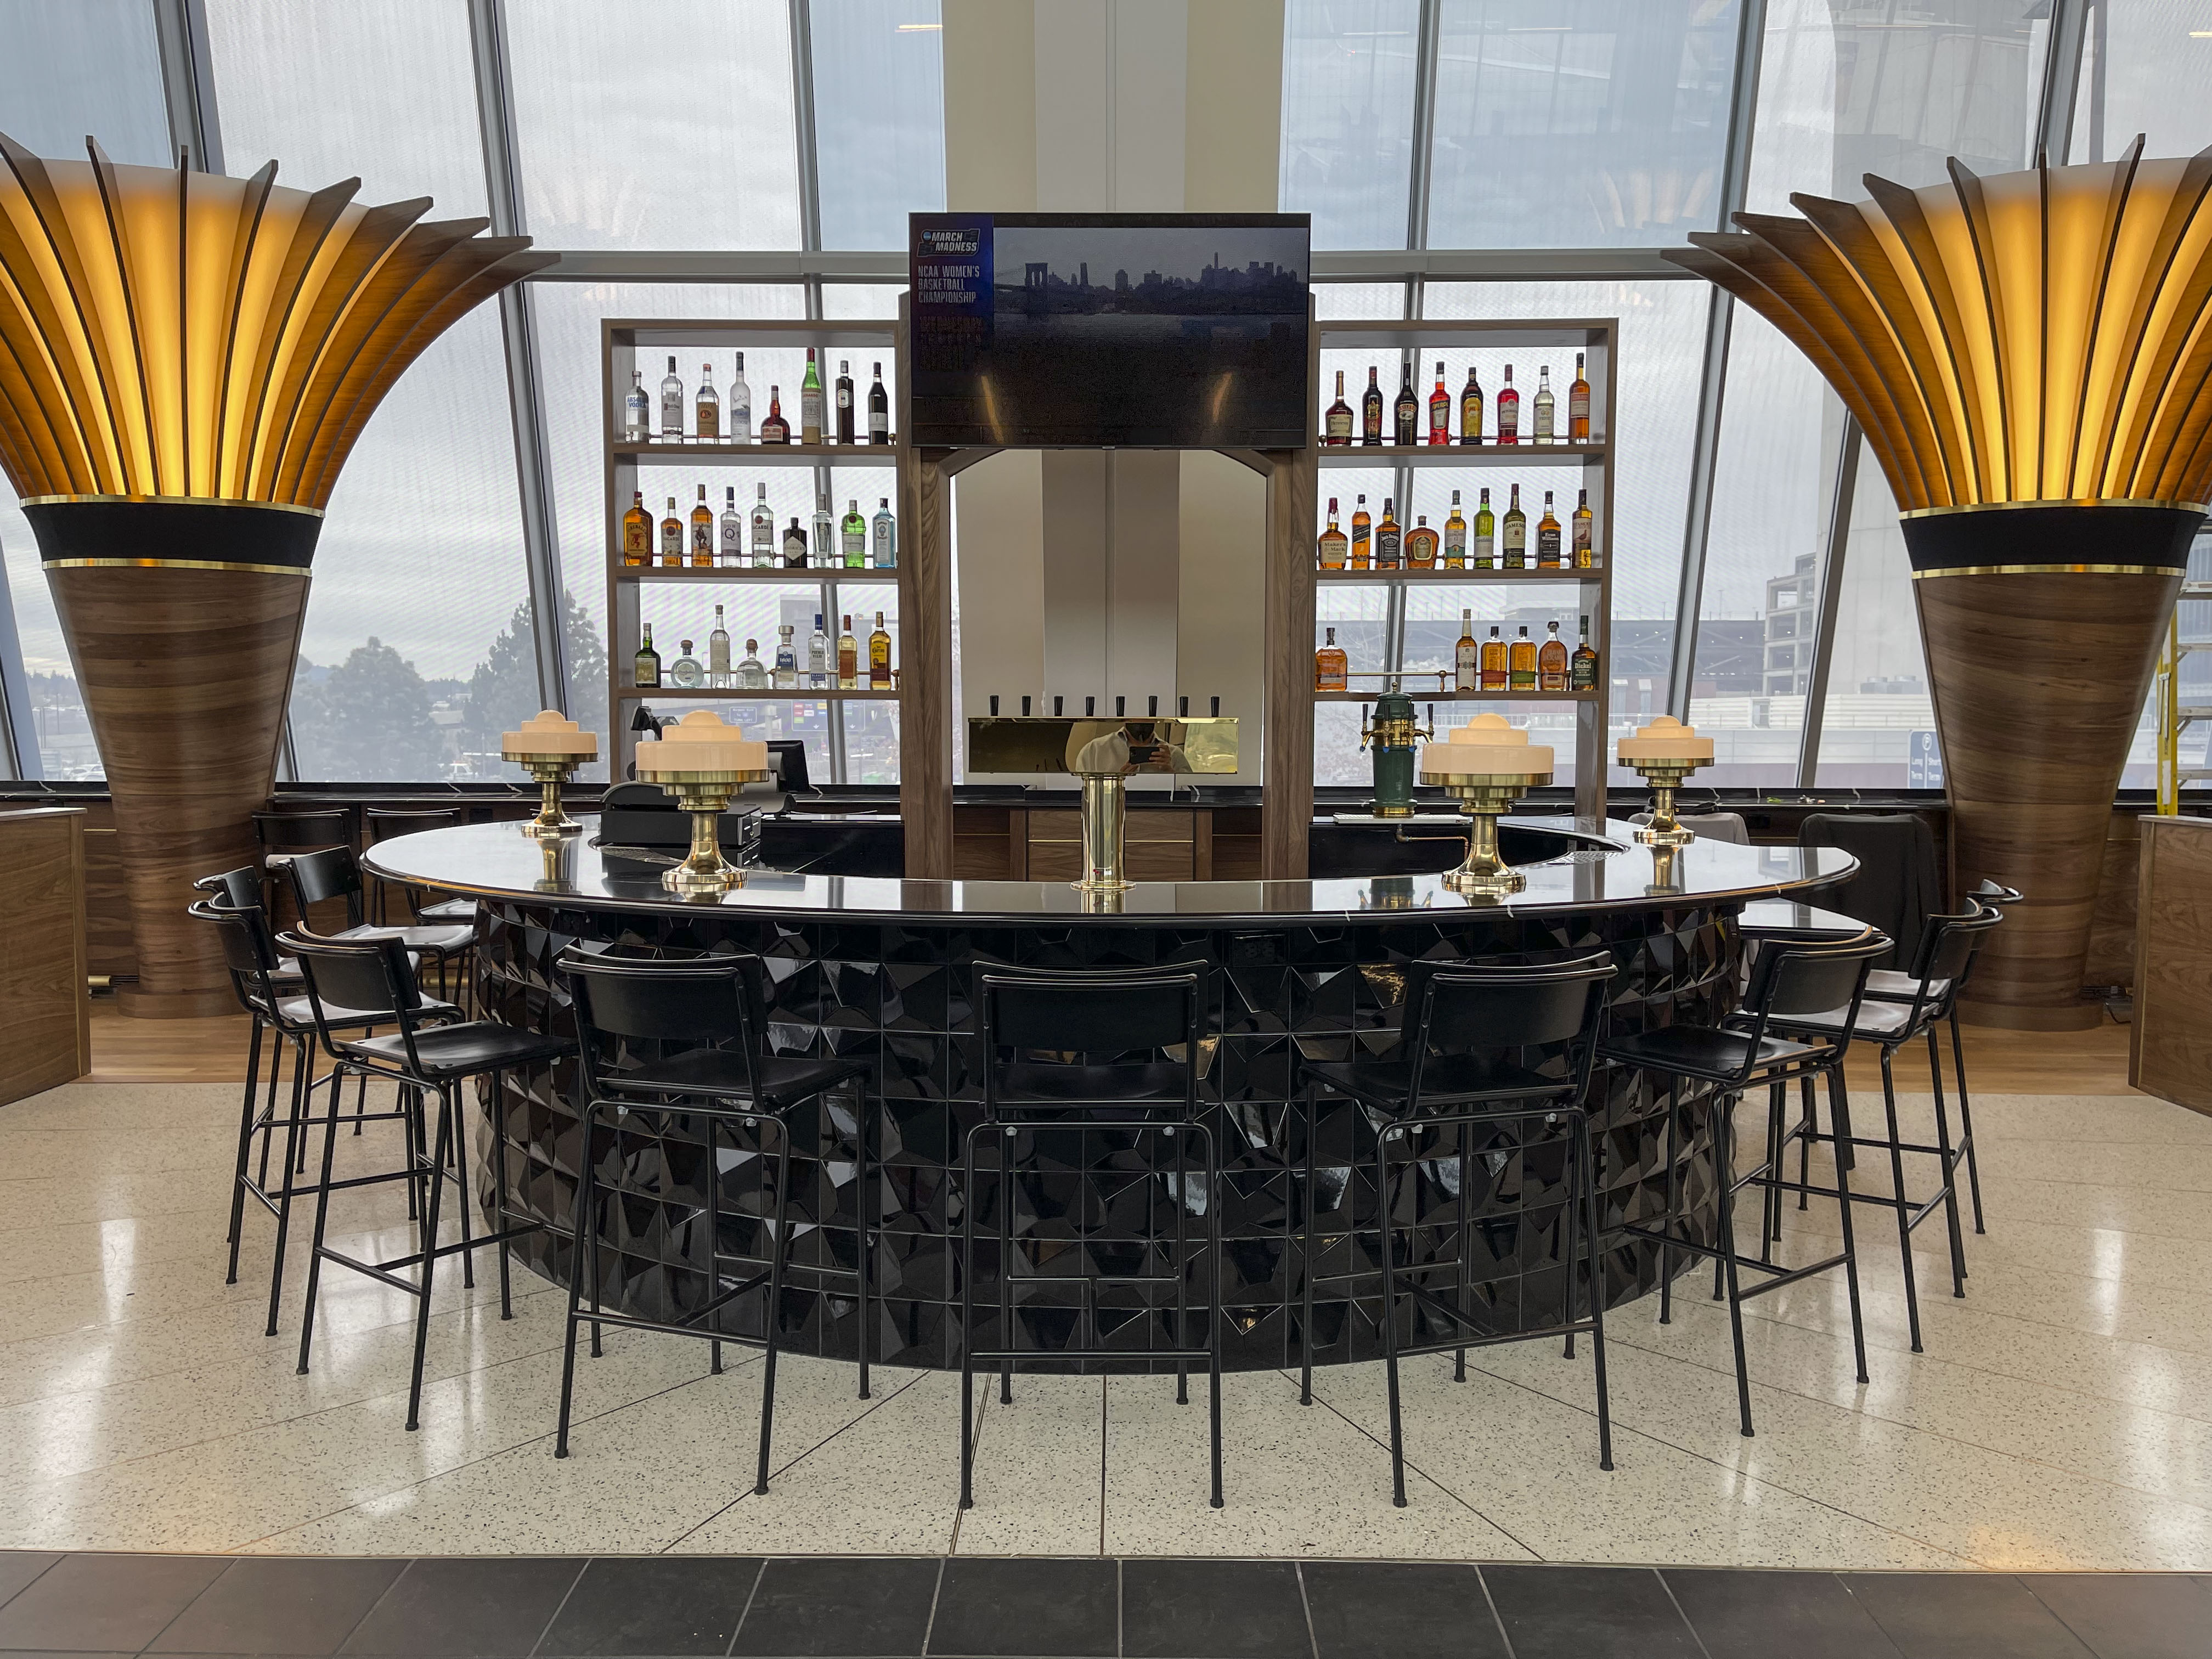 A Women-in-Aviation Themed Bar Opens at Portland International Airport